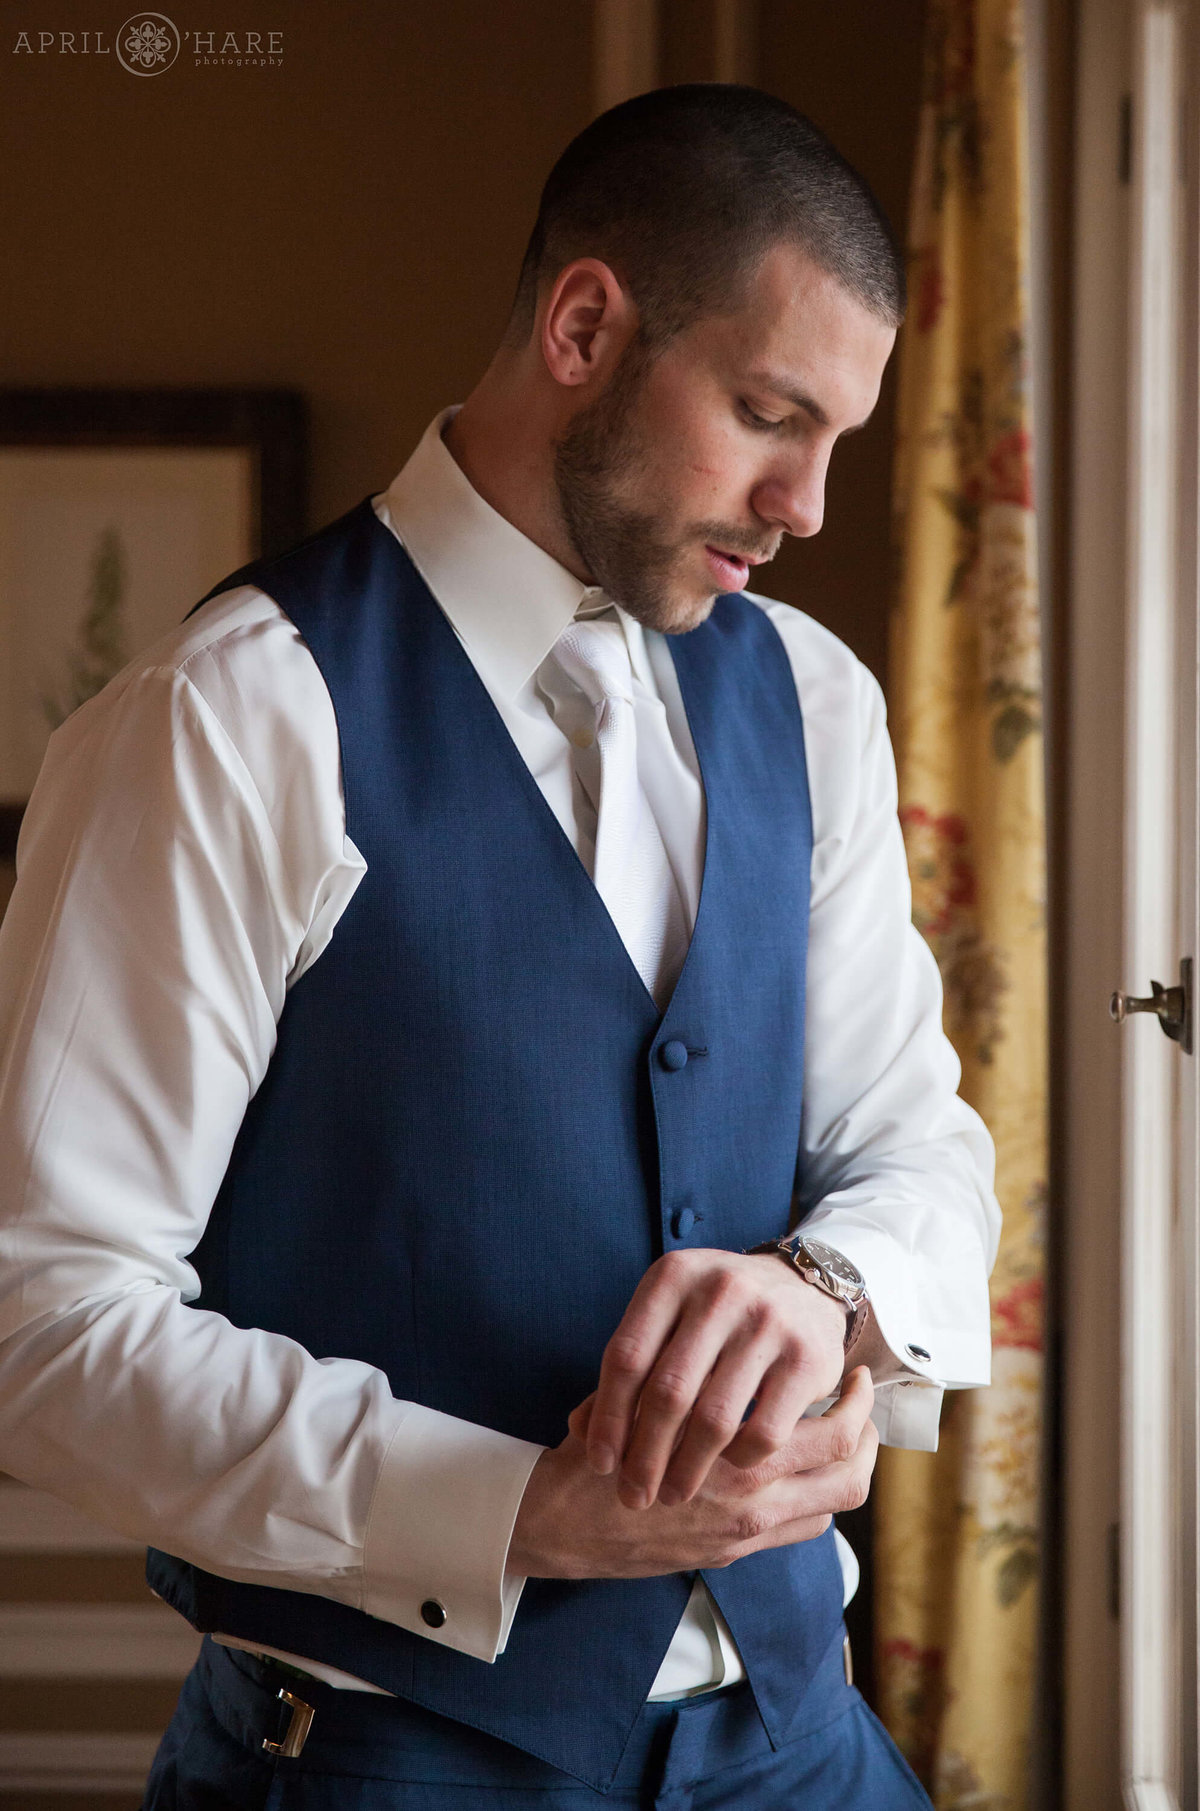 Groom dresses for wedding day at Highlands Ranch Mansion in Colorado